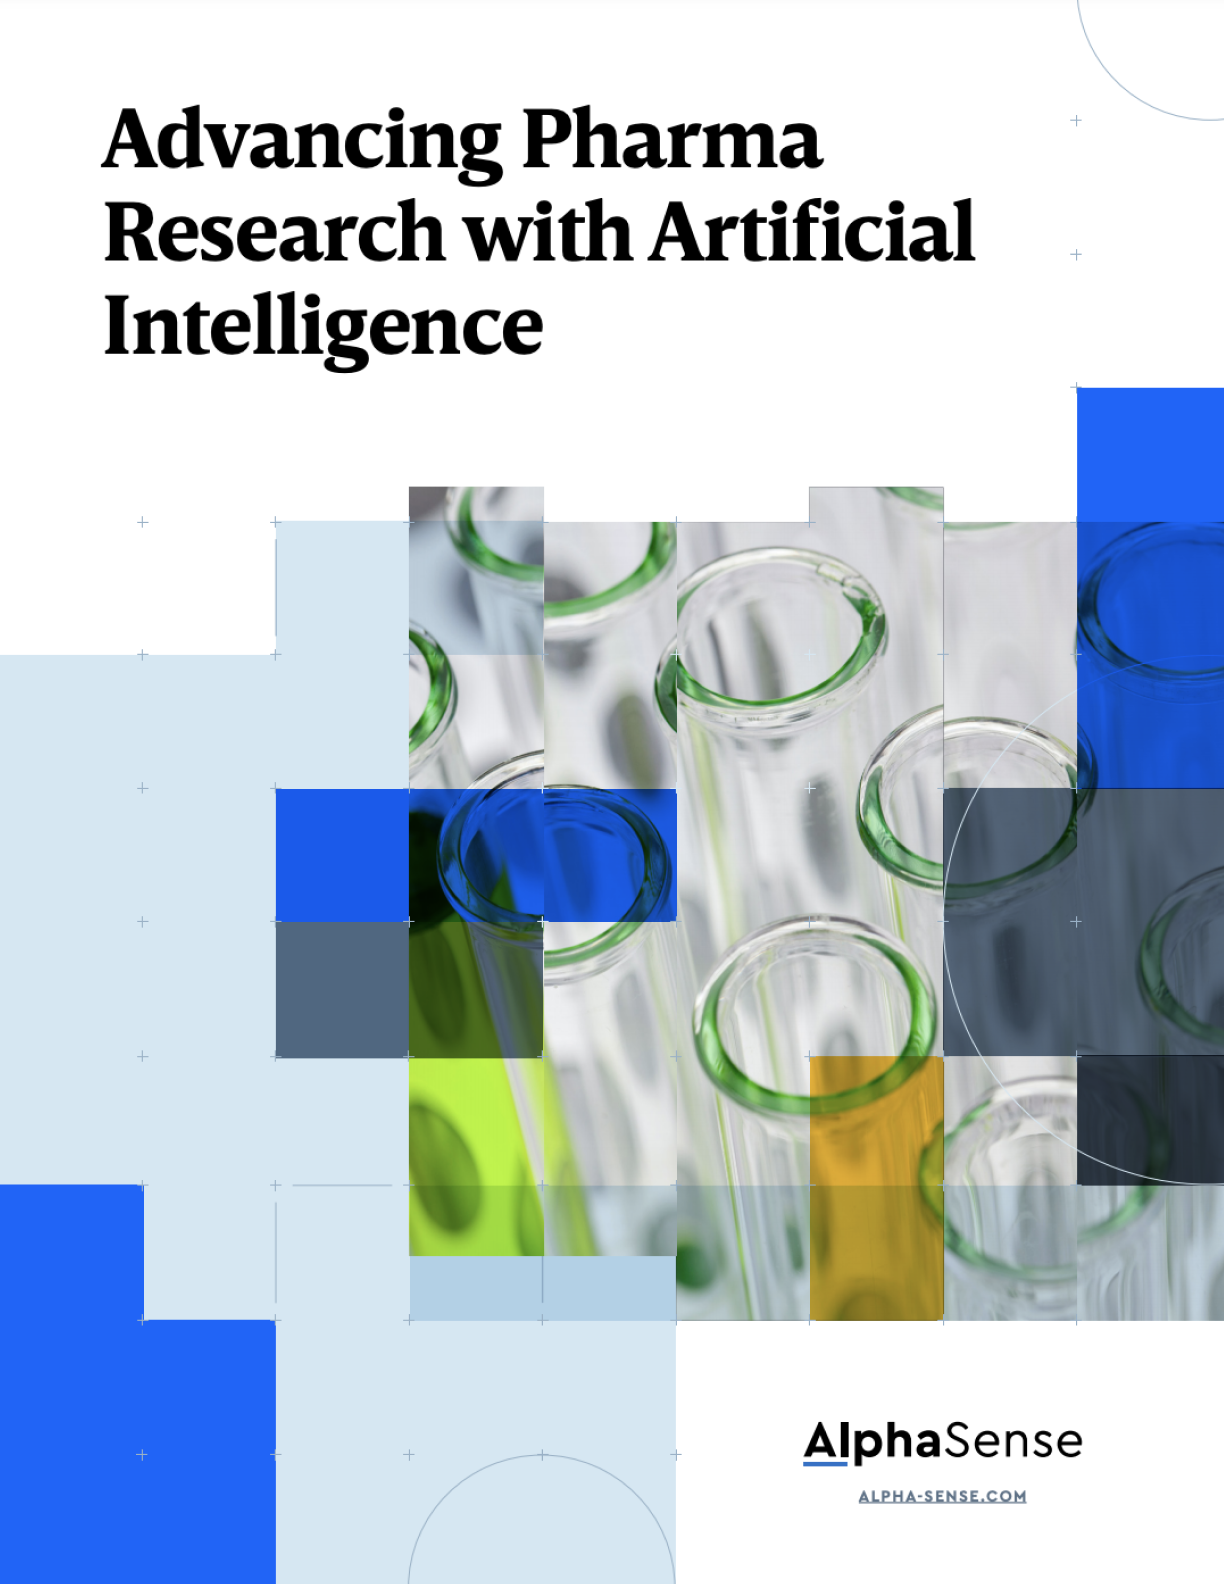 Advancing Pharma Research with Artificial Intelligence